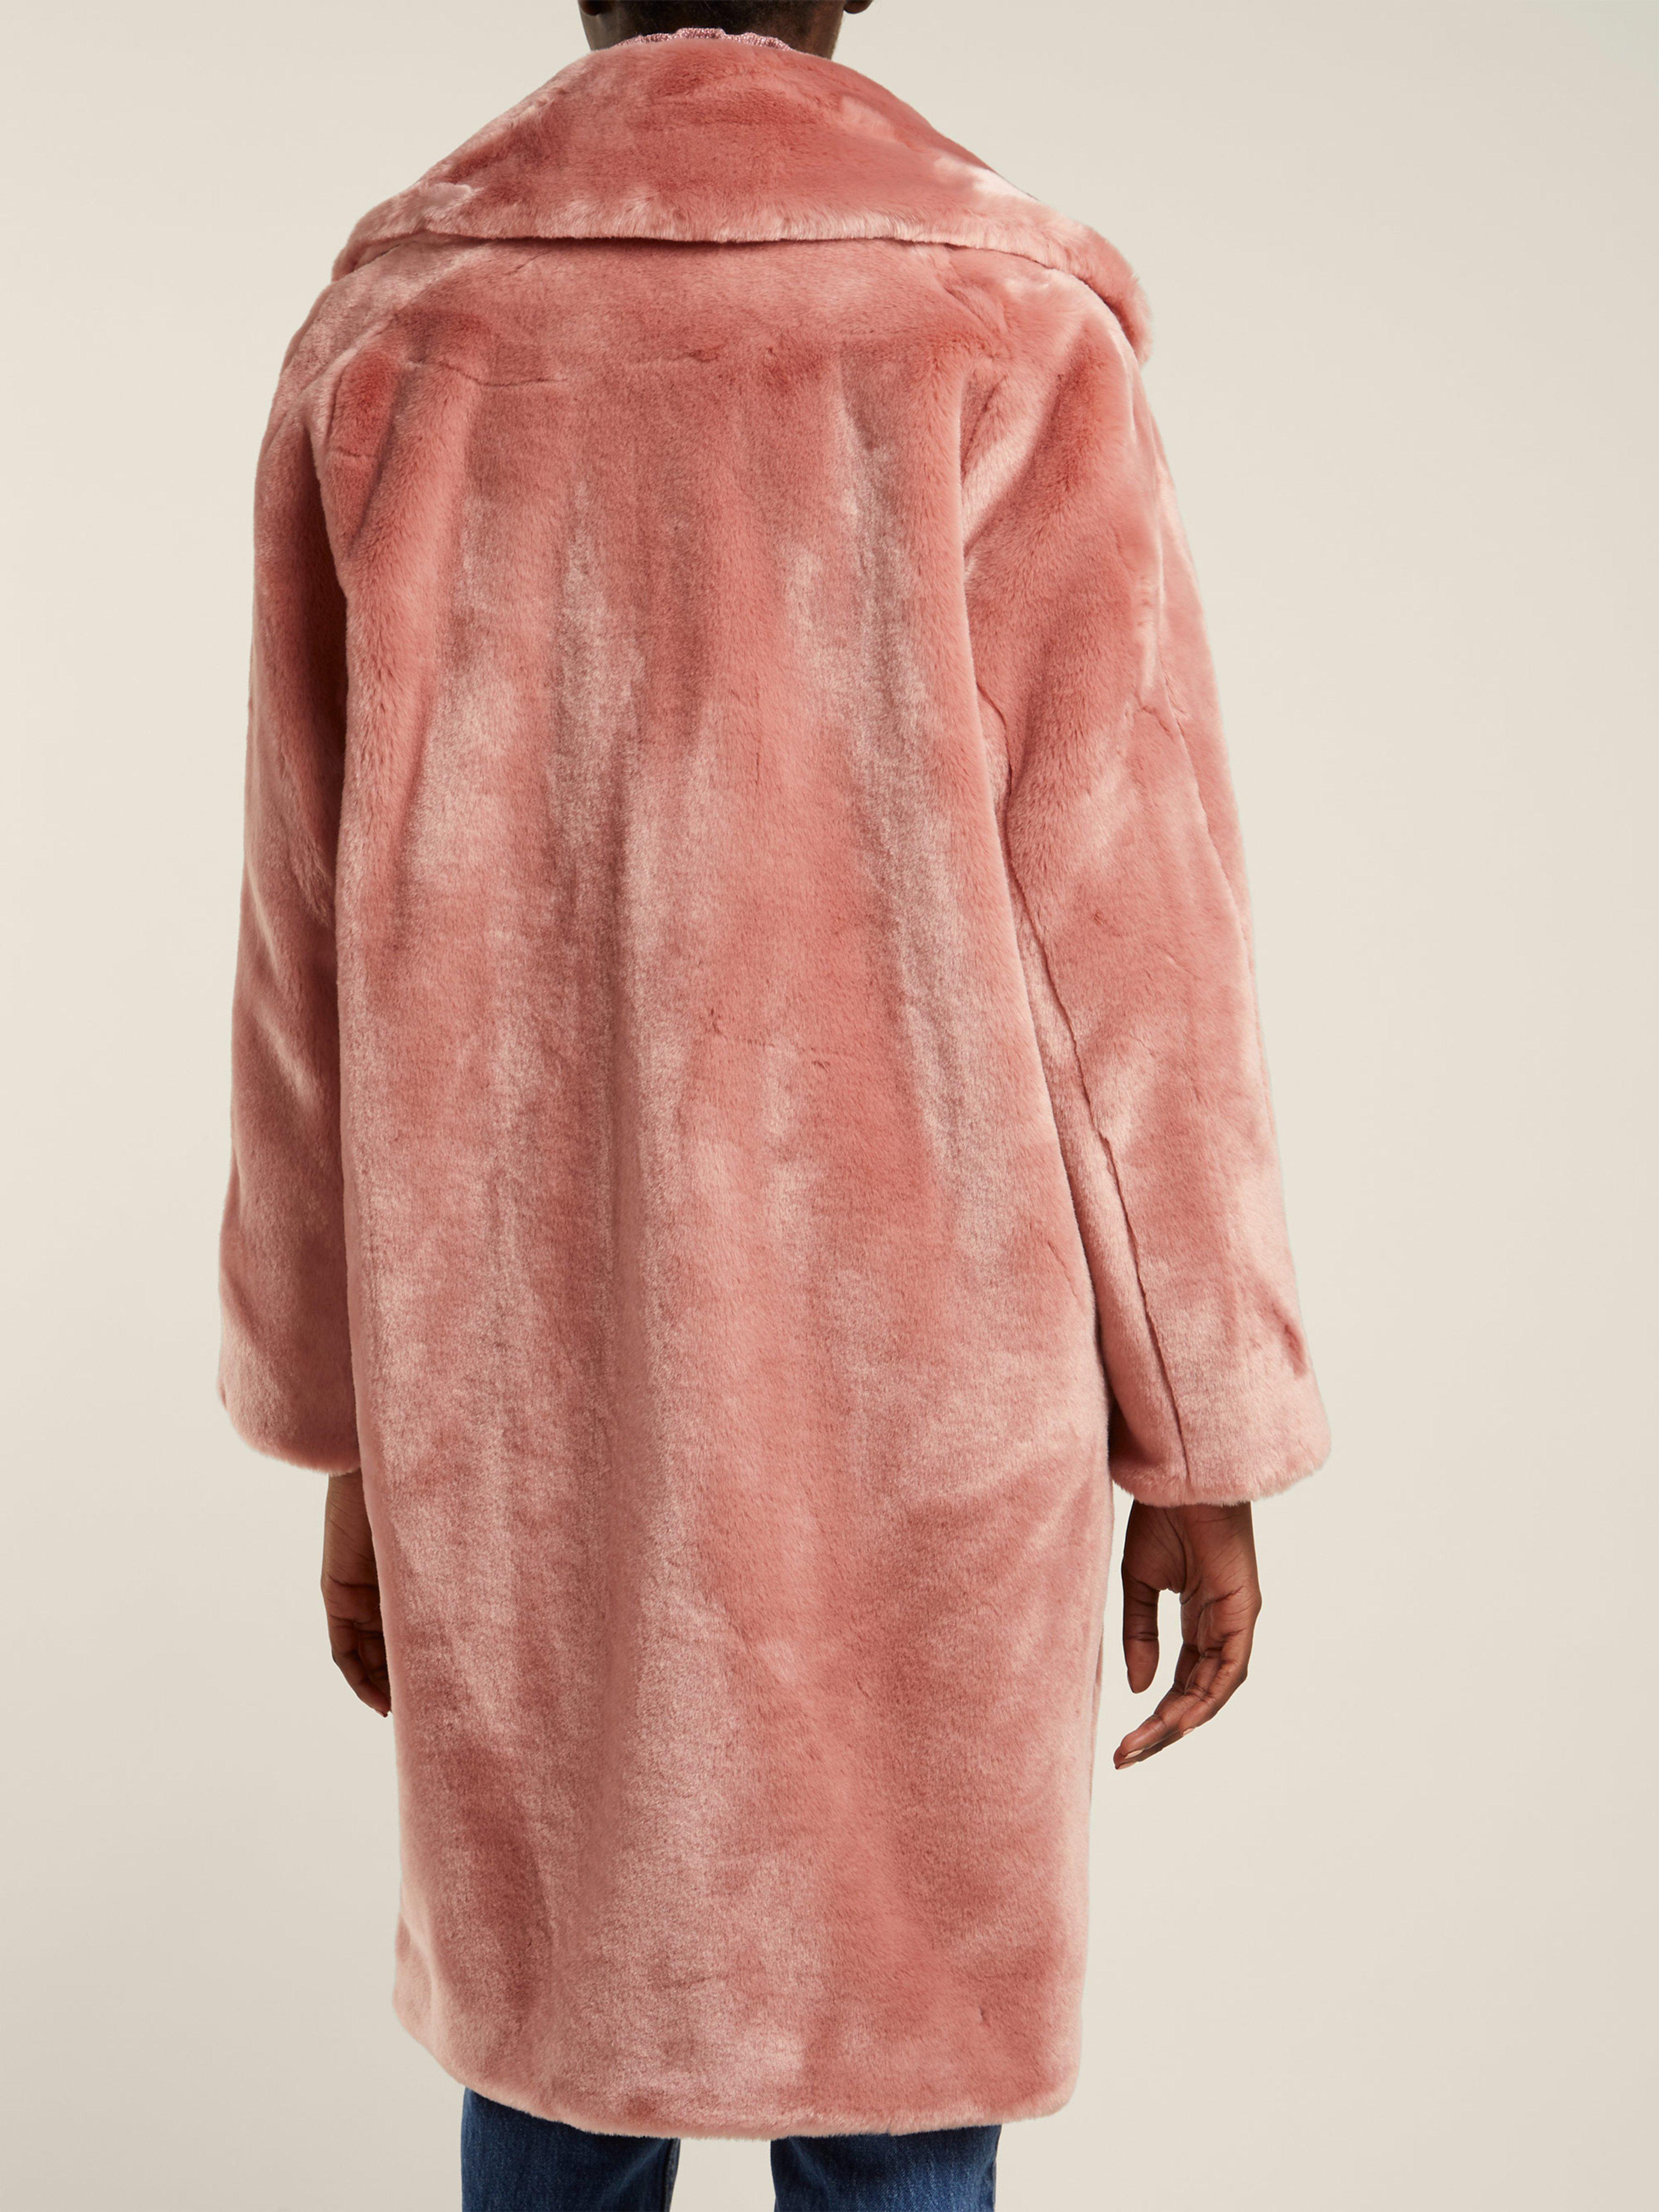 Shrimps Eamon Crystal Buttoned Faux Fur Coat in Pink - Lyst